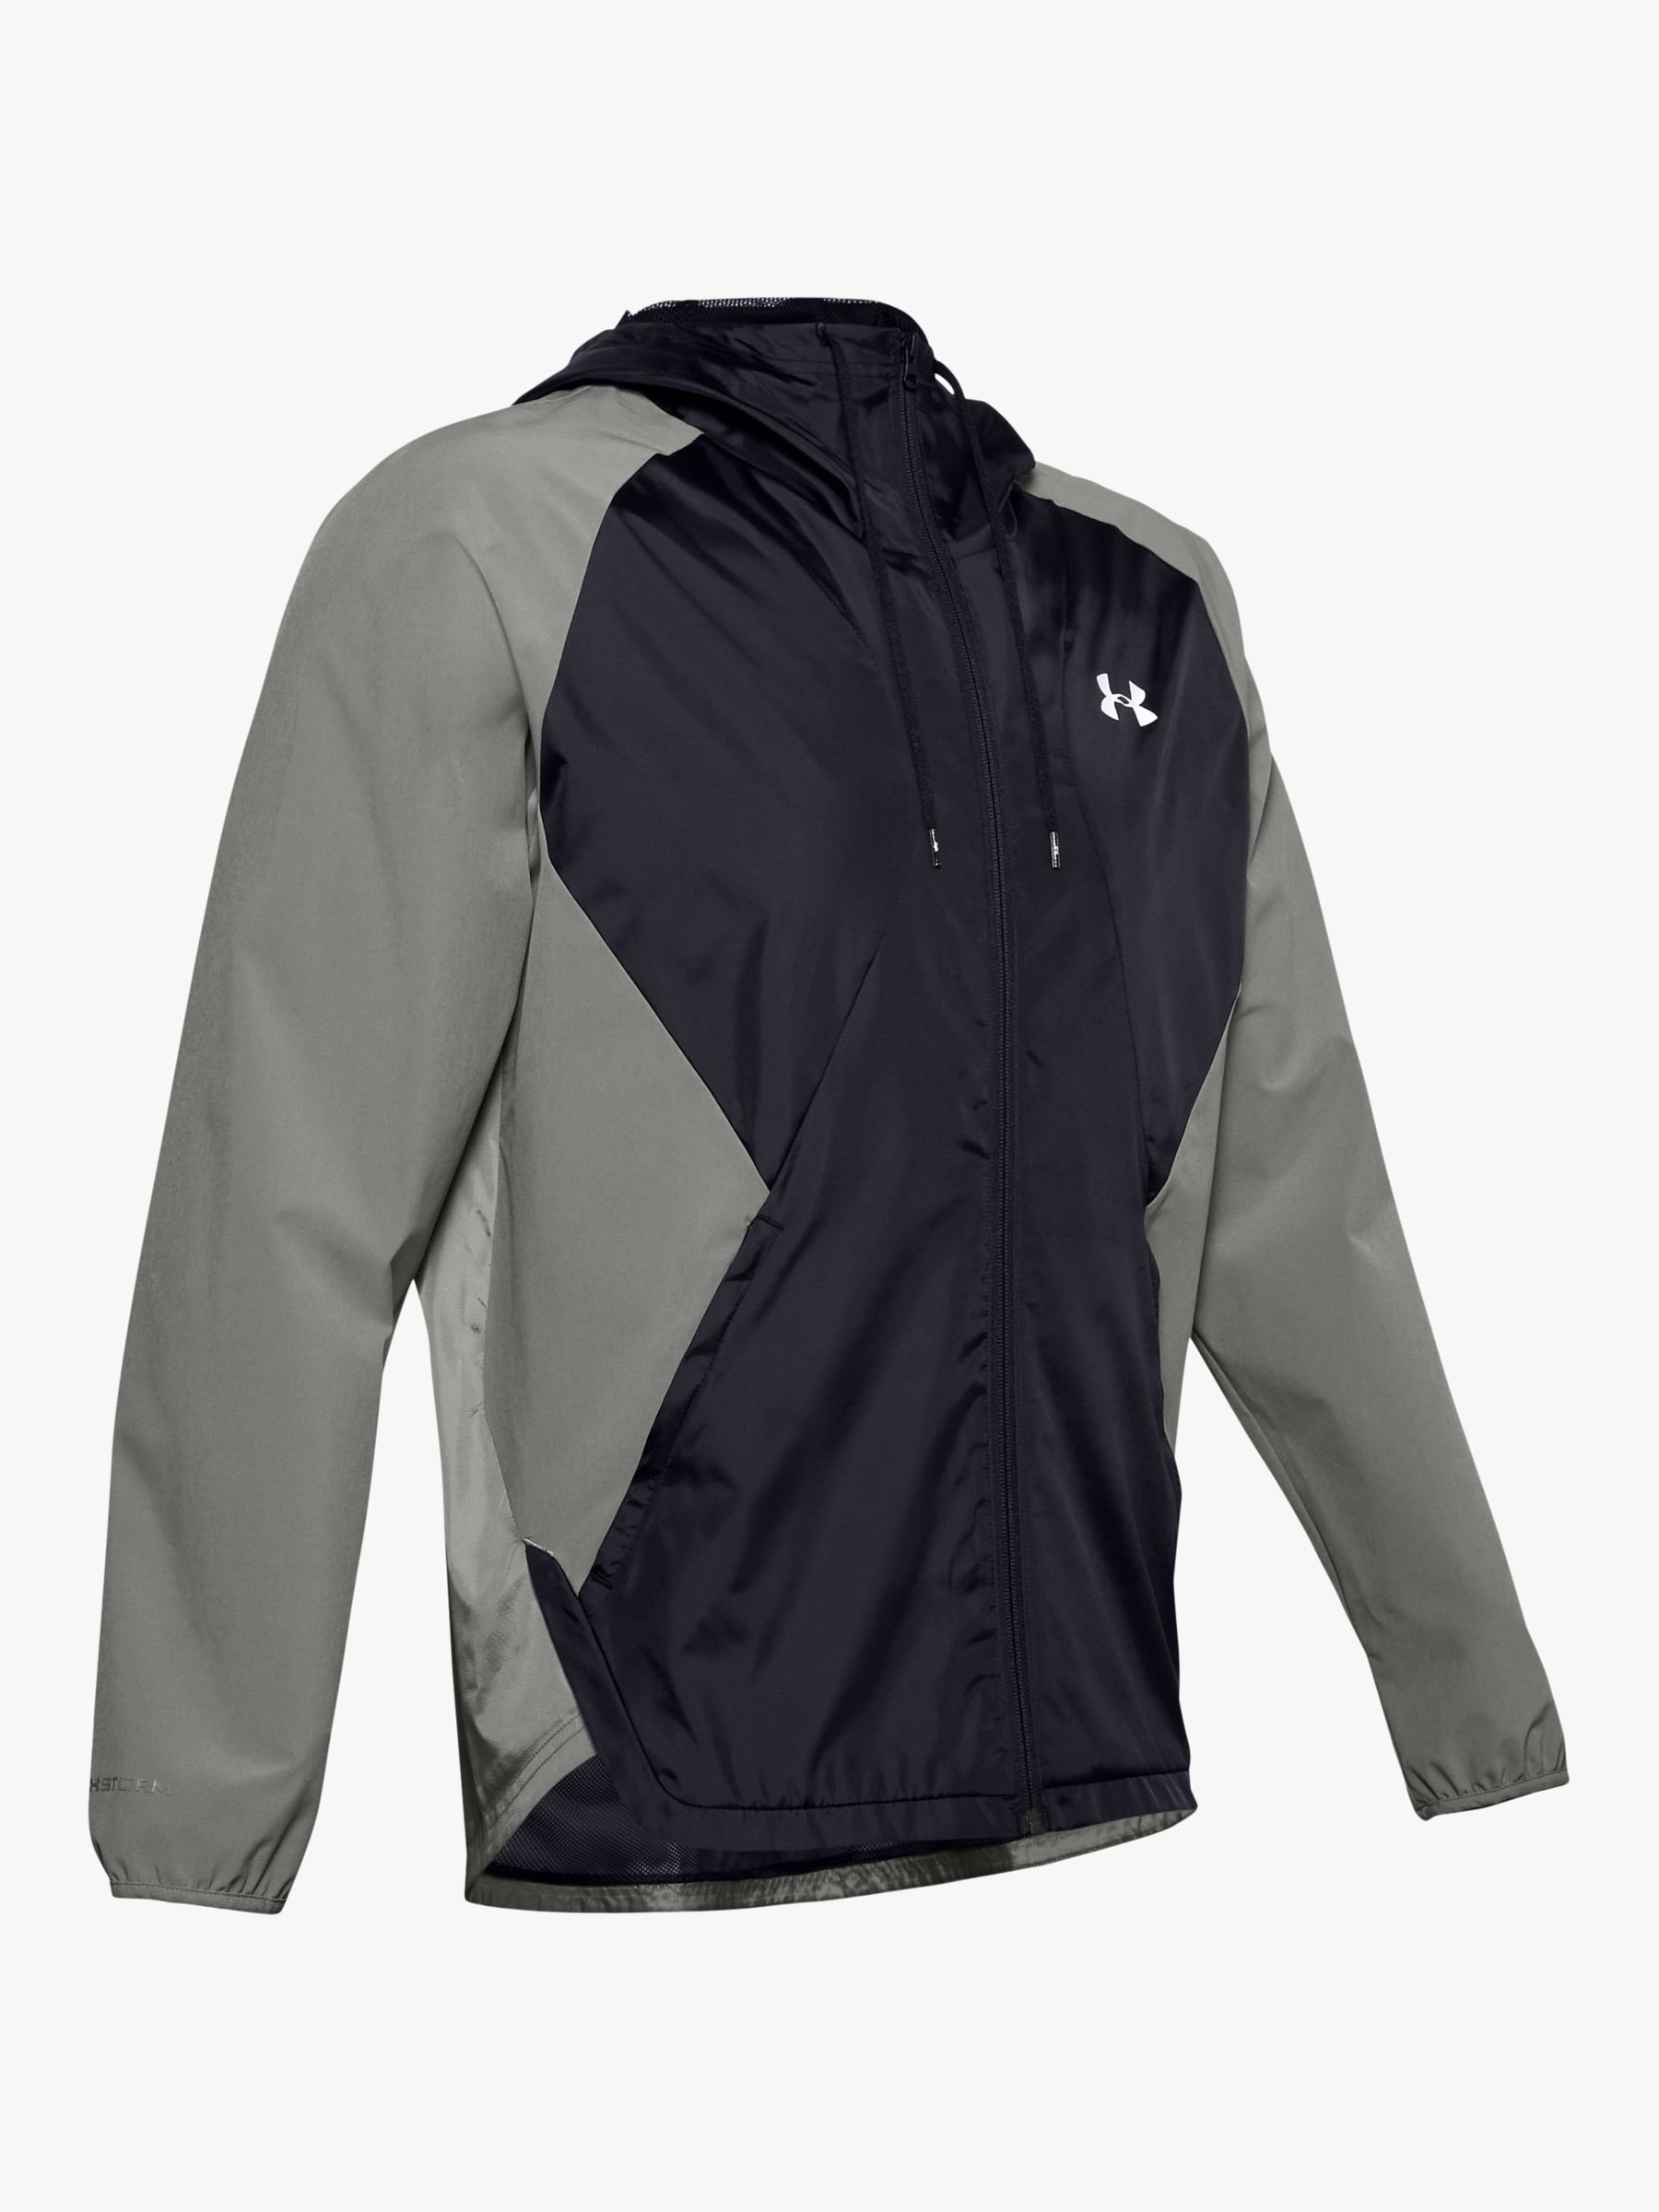 Under Armour Men's Stretch Woven Full Zip Jacket 